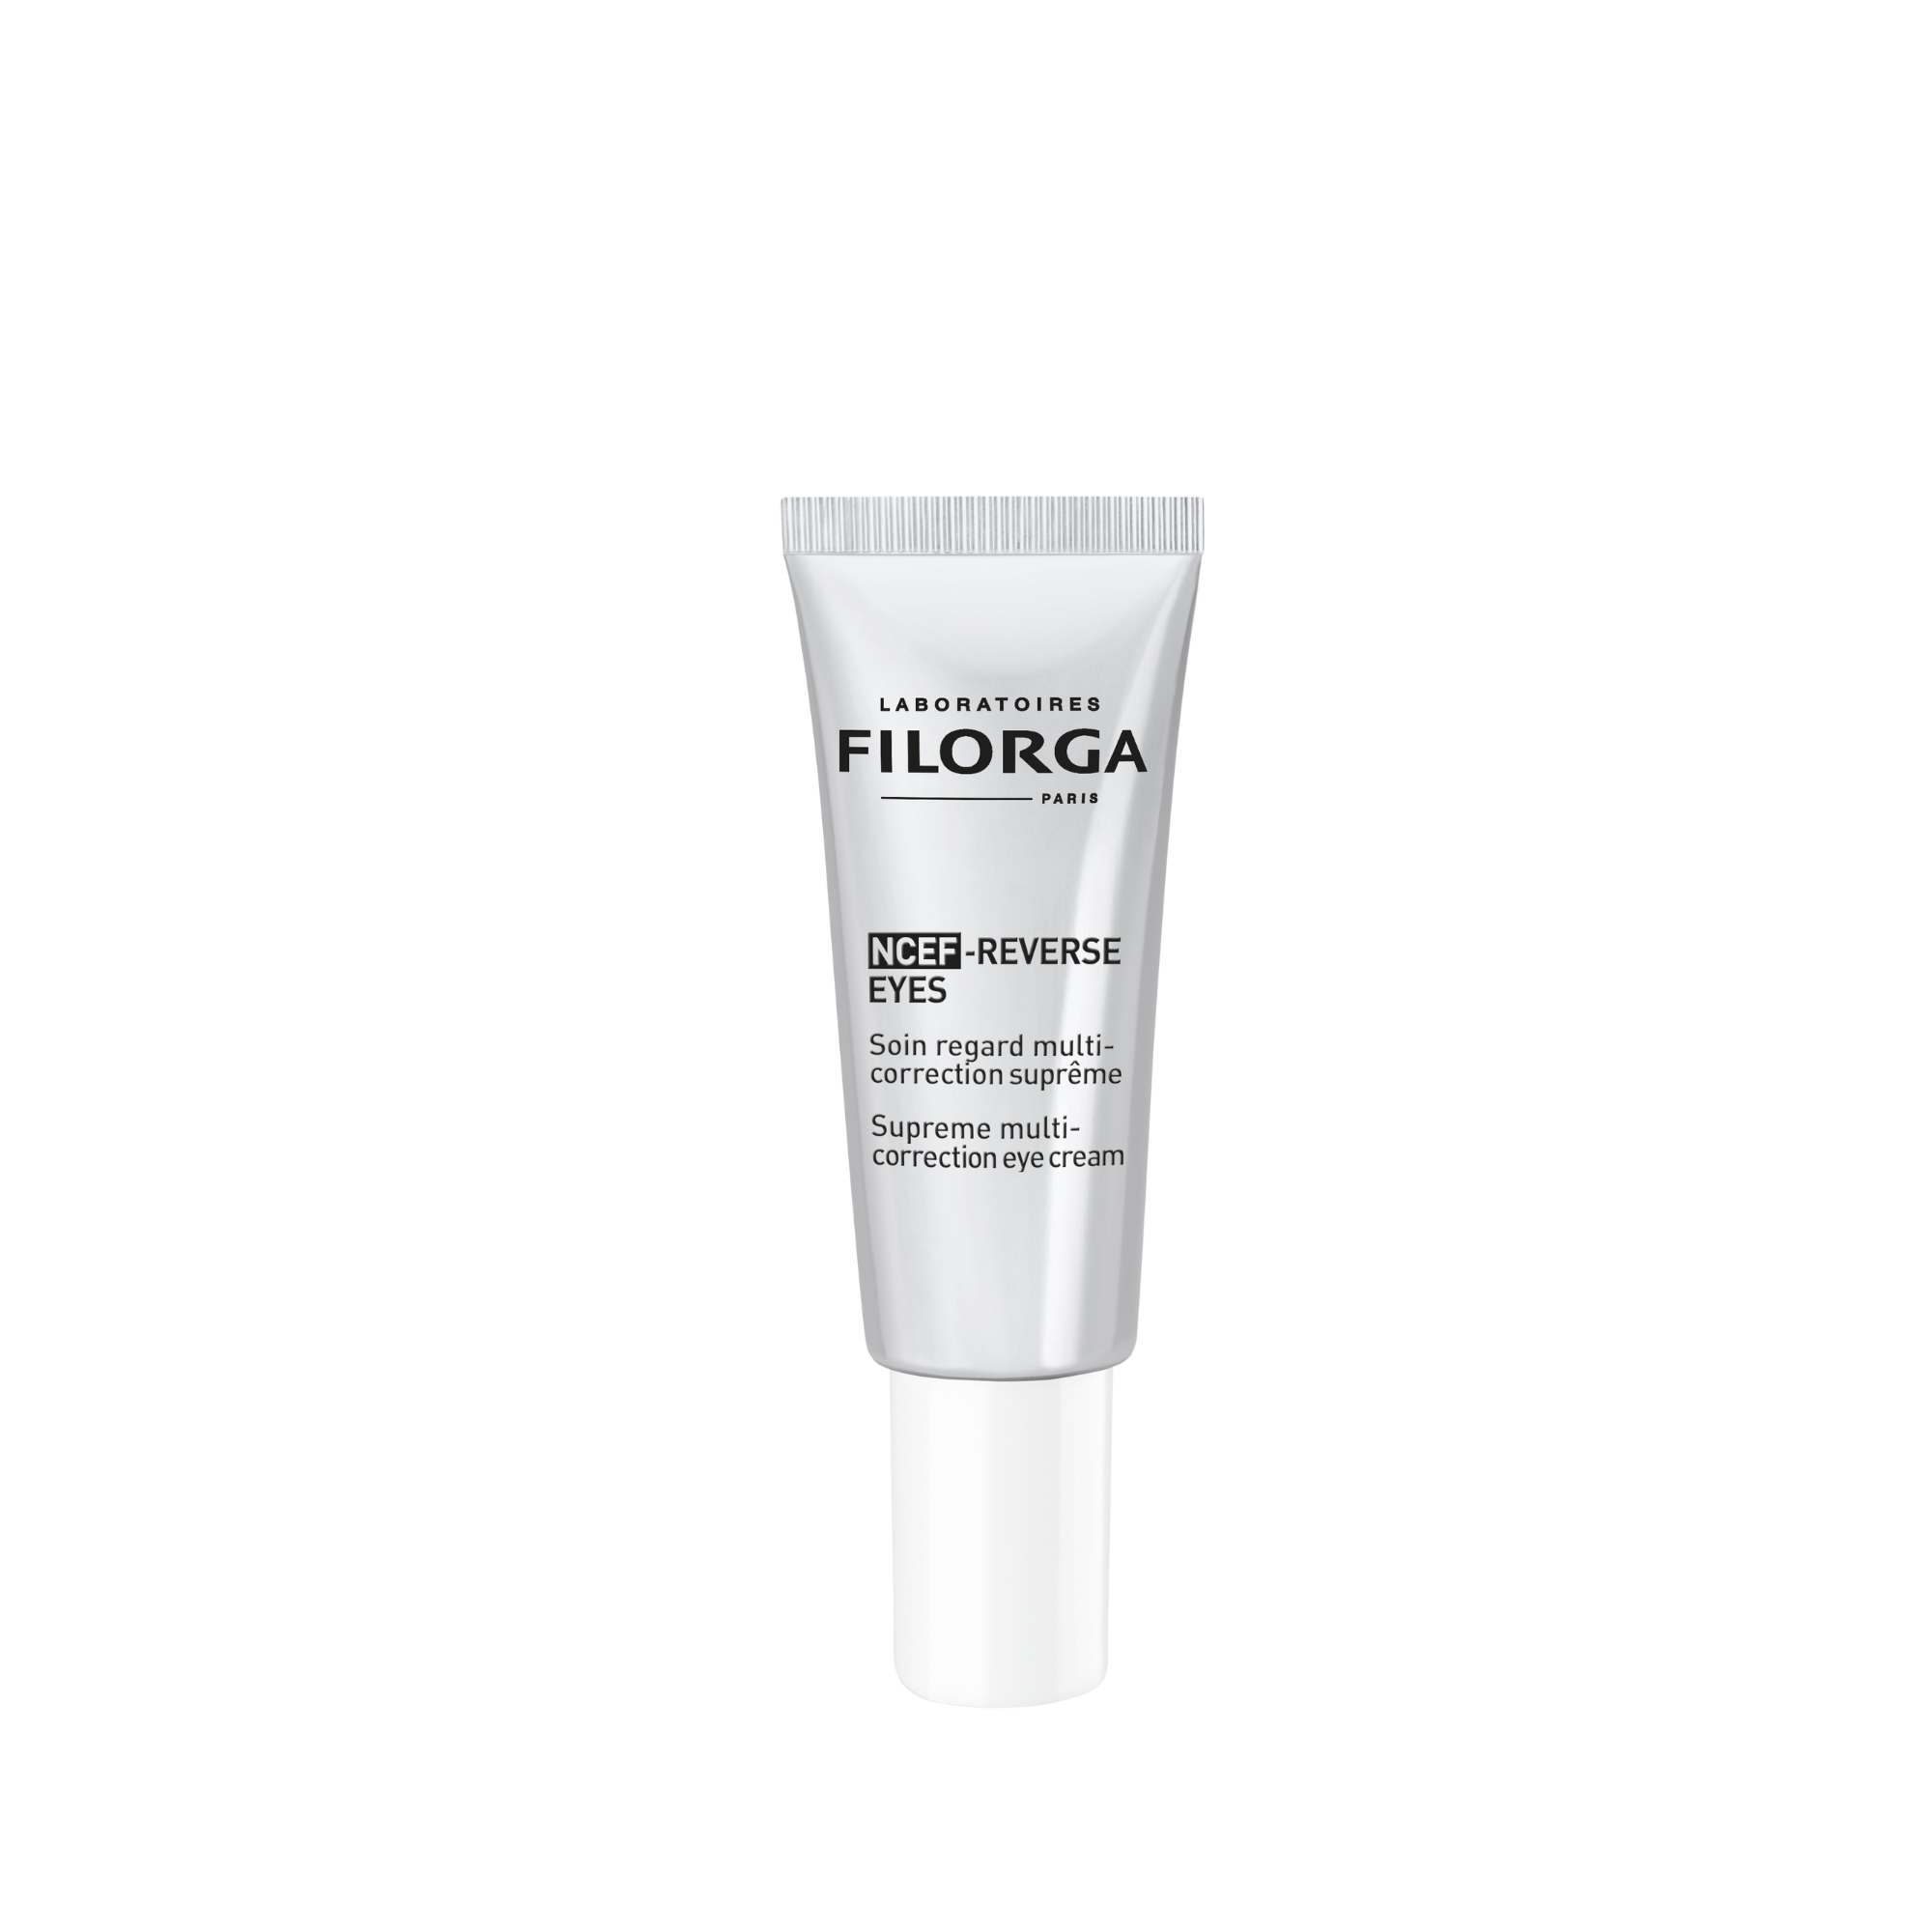 Filorga Optim-Eyes Eye Cream, Revitalizing 3-in-1 Skin Treatment for Rapid  Reduction of Dark Circles, Wrinkles & Puffiness Around the Eyes, 0.5 fl.  oz. : Beauty & Personal Care 